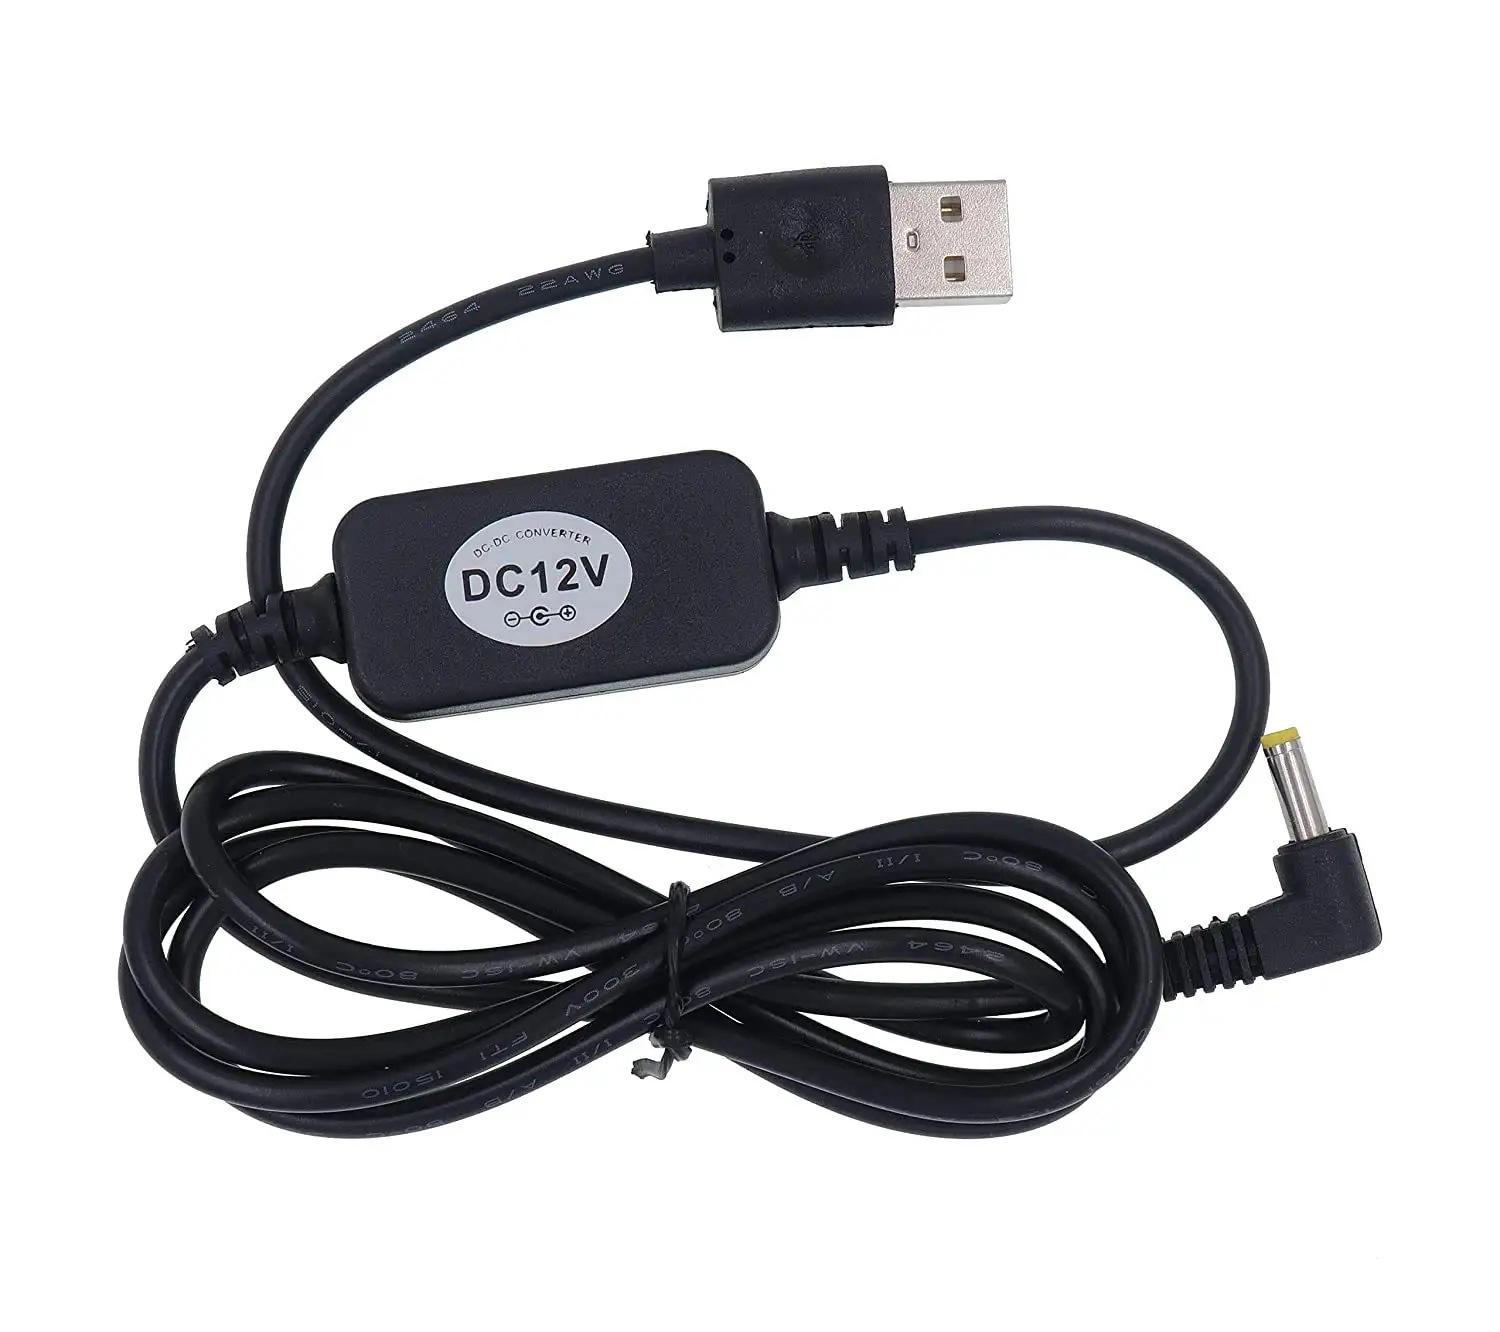 

USB 5V to DC 12V 4mm x 1.7mm Power Cable, Compatible with Dot Devices, USB Voltage Step Up Converter Cable, Power Supply Adapter